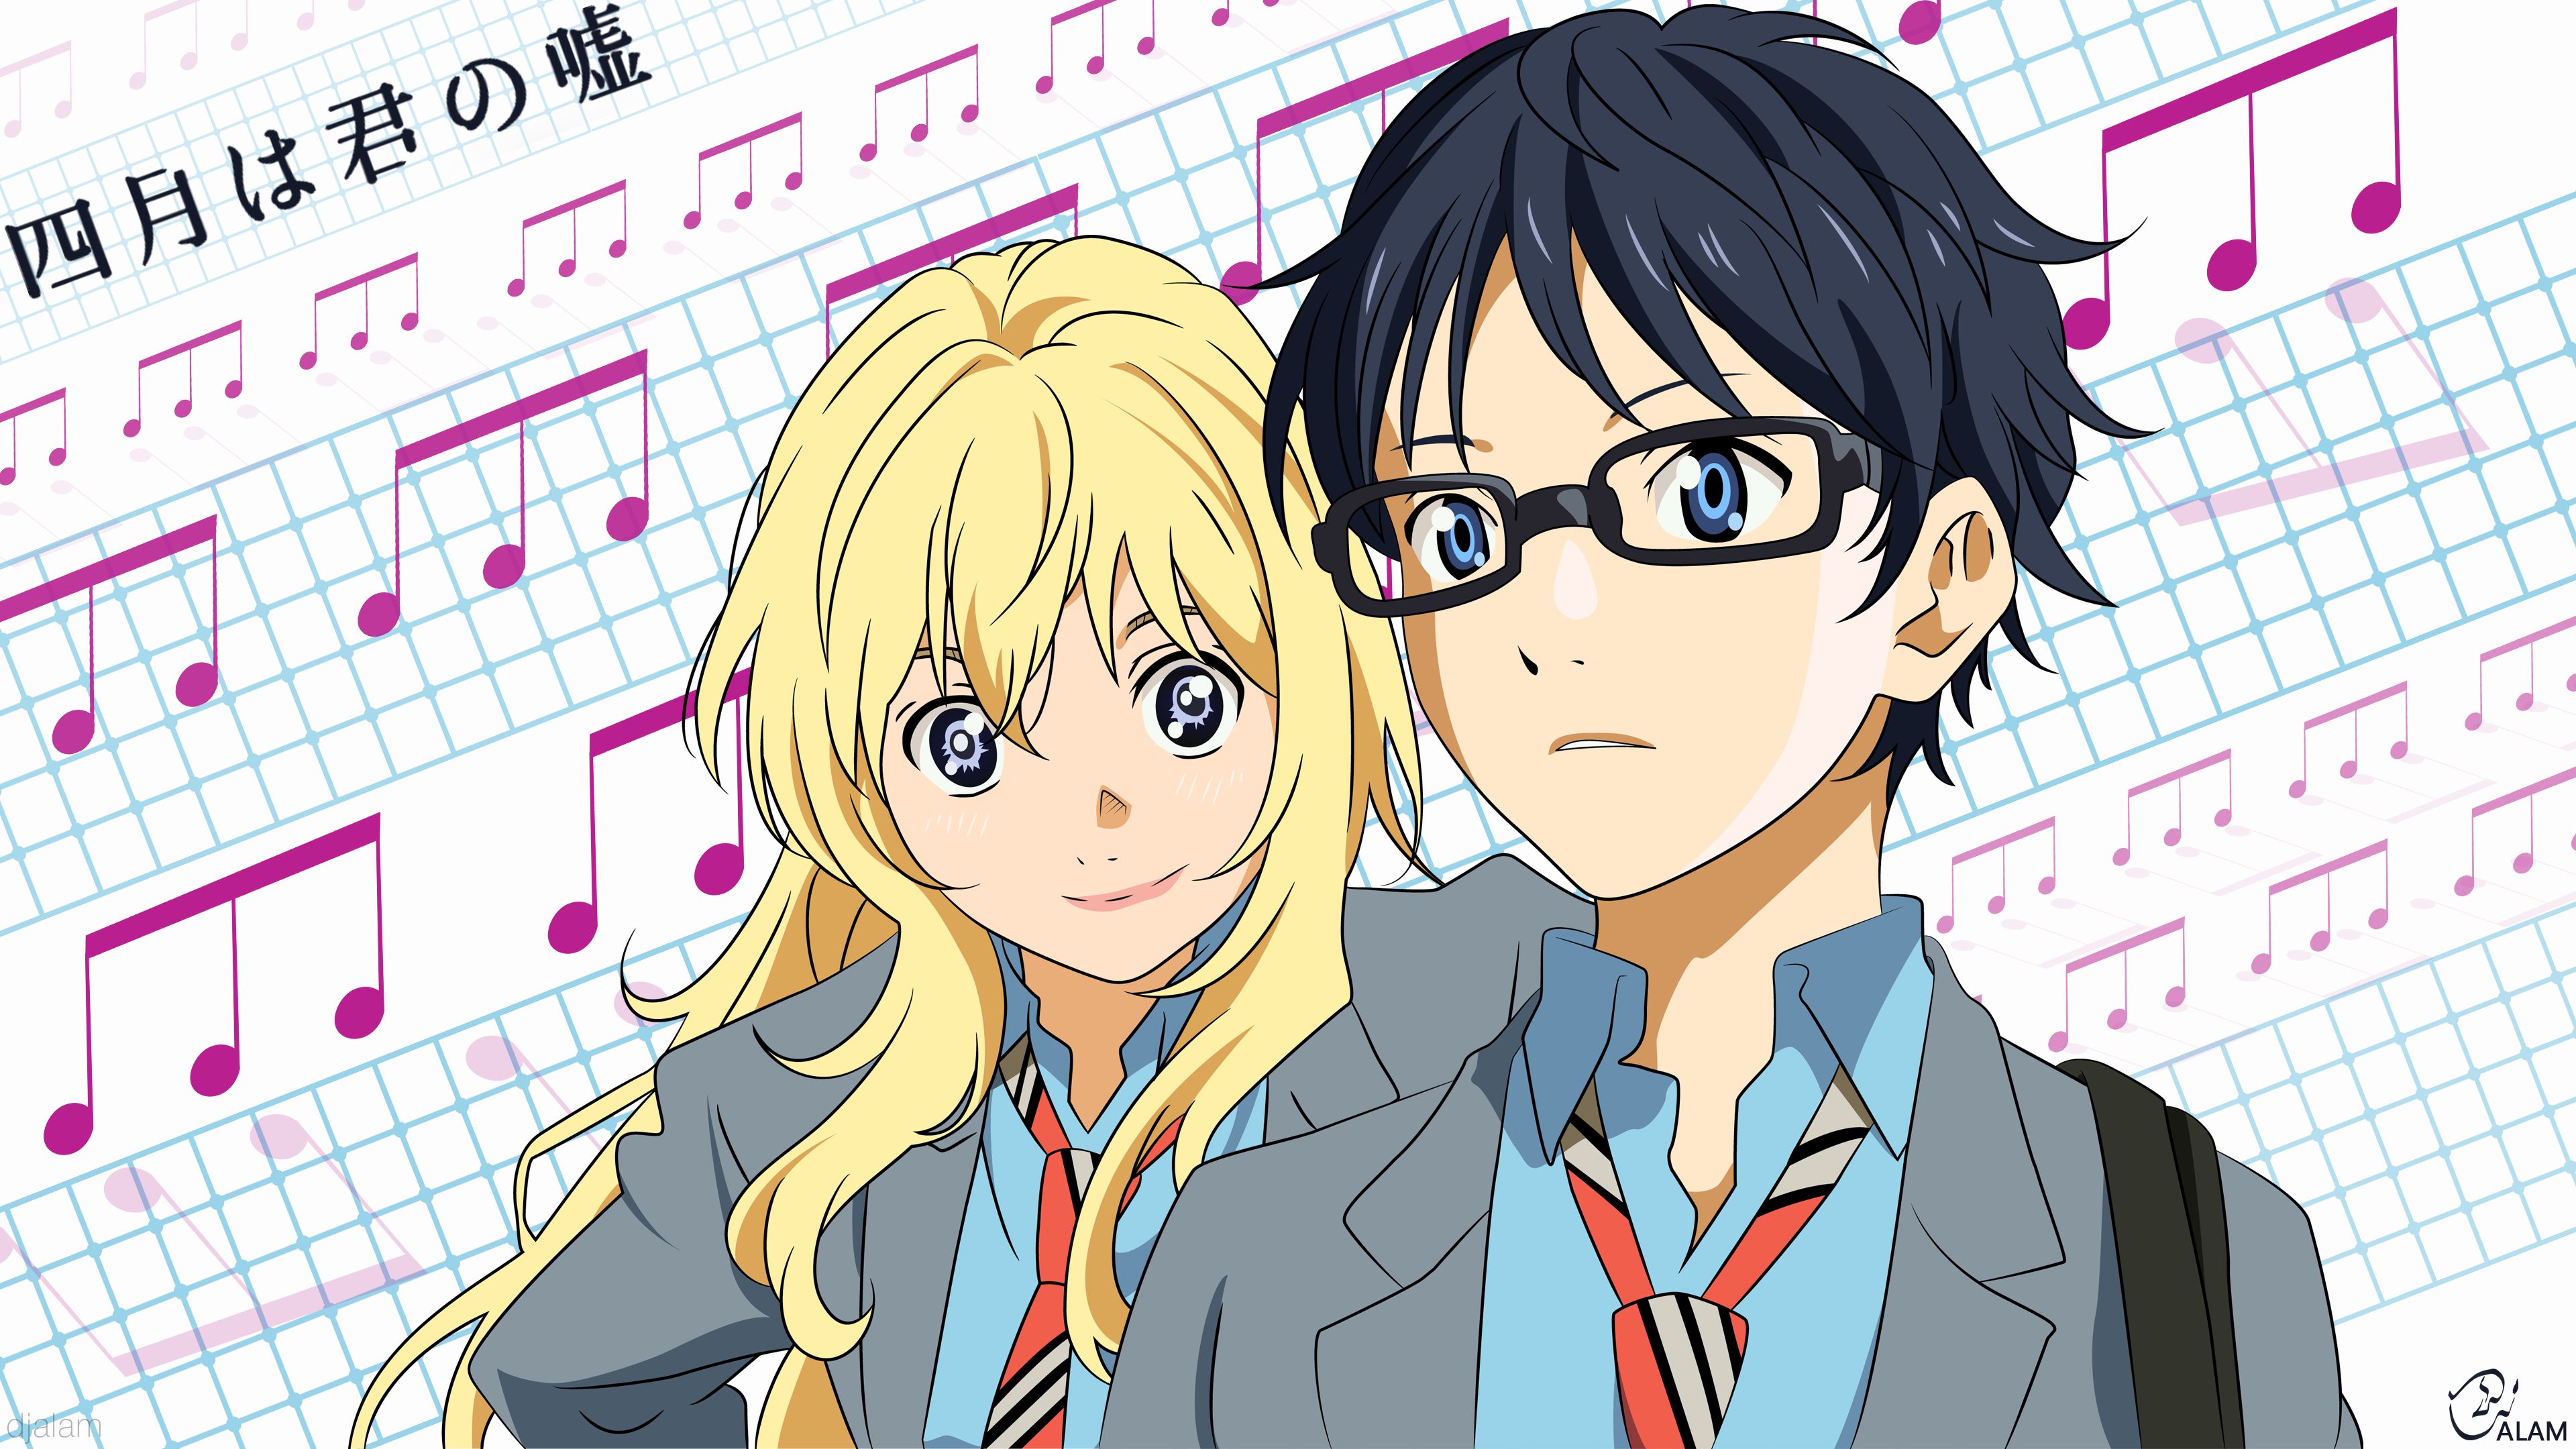 5. "Kousei Arima" from Your Lie in April - wide 10